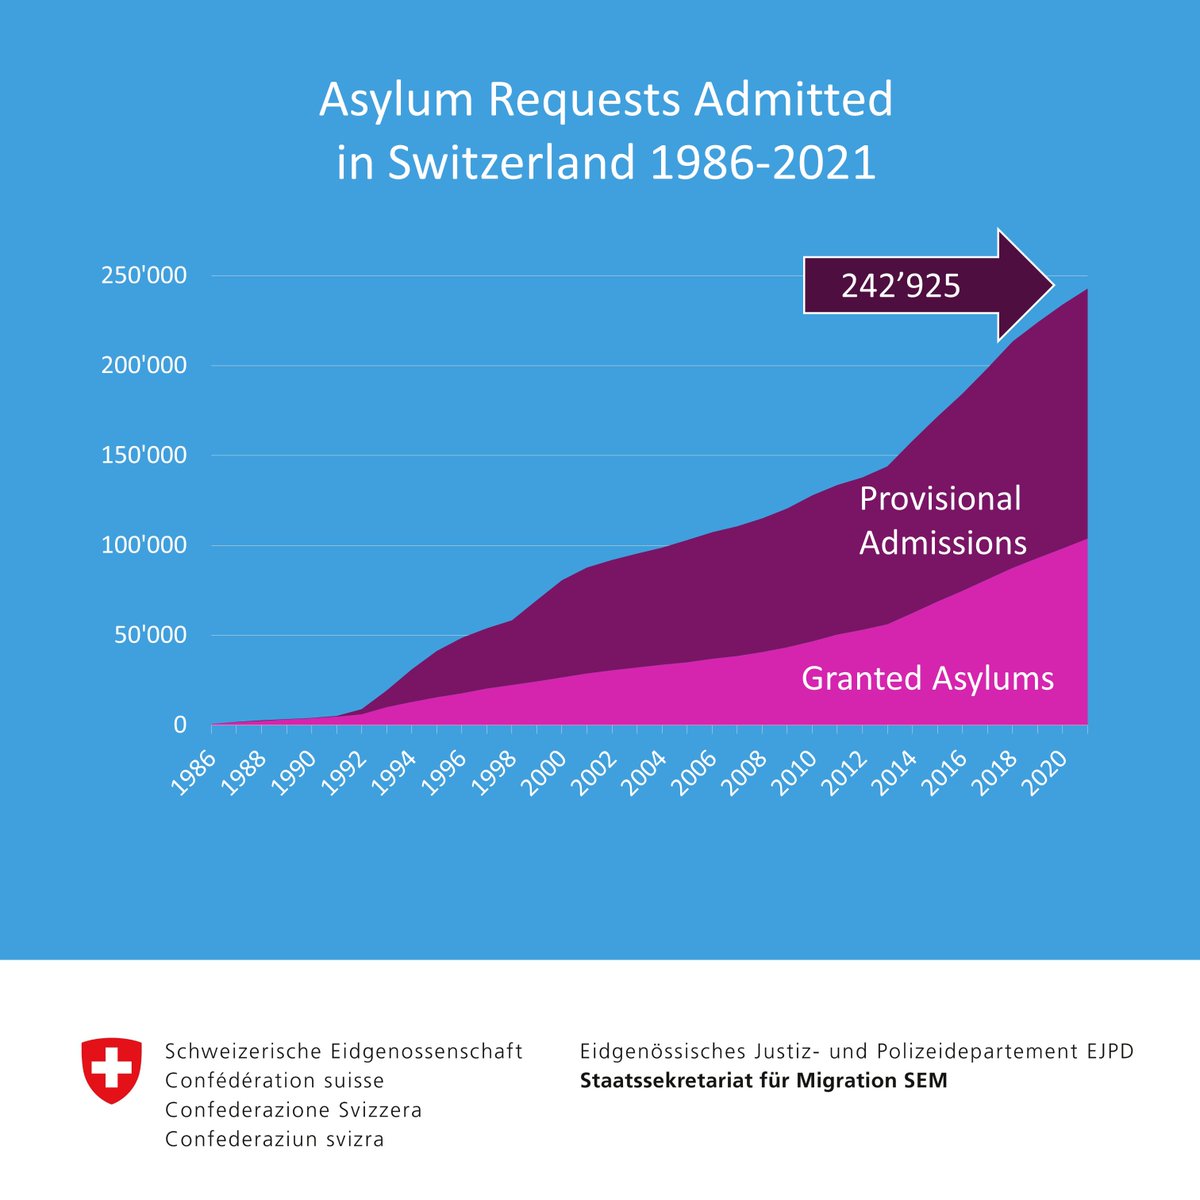 Today is #WorldRefugeeDay. Over the past 35 years, Switzerland has granted asylum or provisionally admitted 242,925 persons. People who are persecuted or threatened, or whose very existence would be at risk if they returned home, will continue to receive this protection.